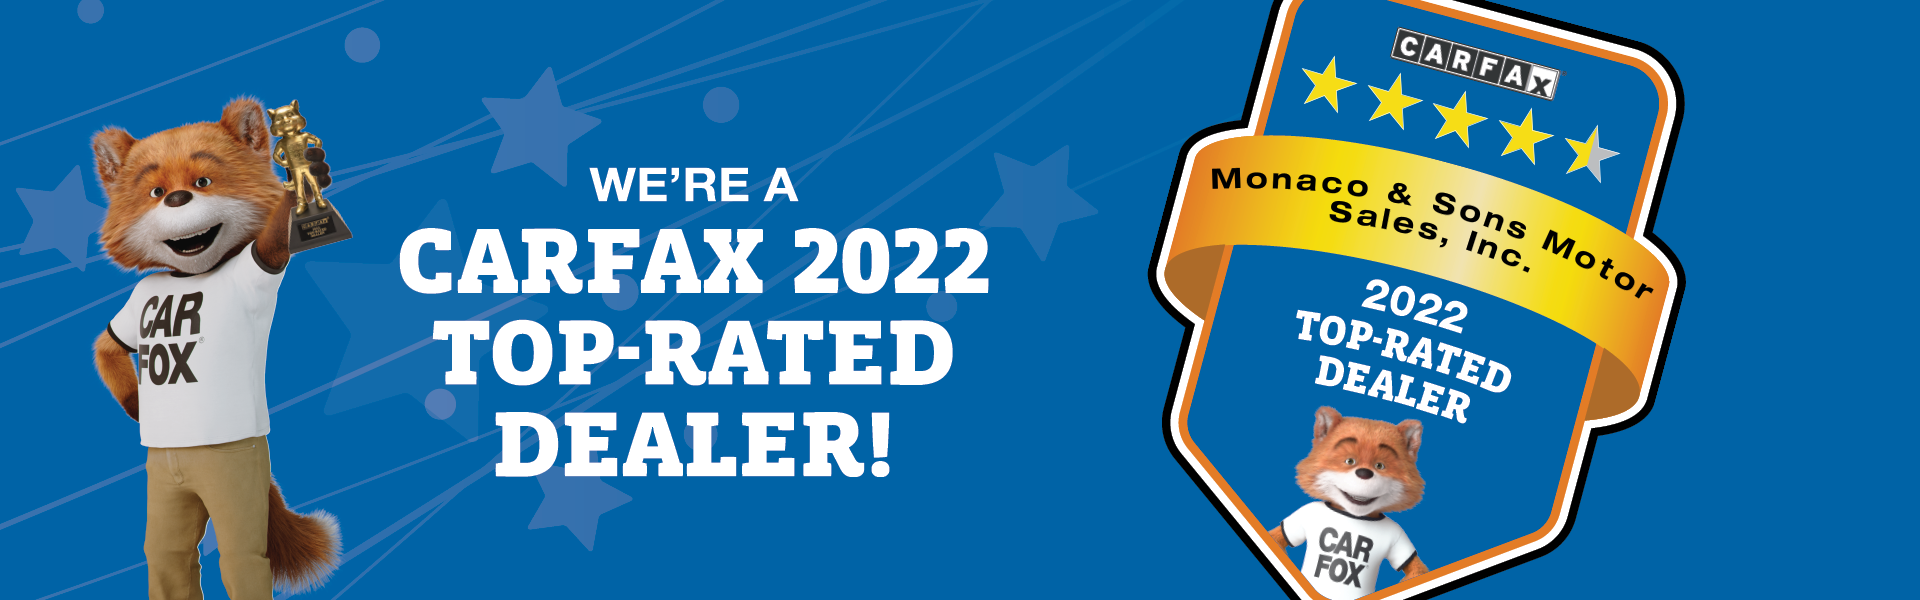 We're a CARFAX Top-Rated Dealer!